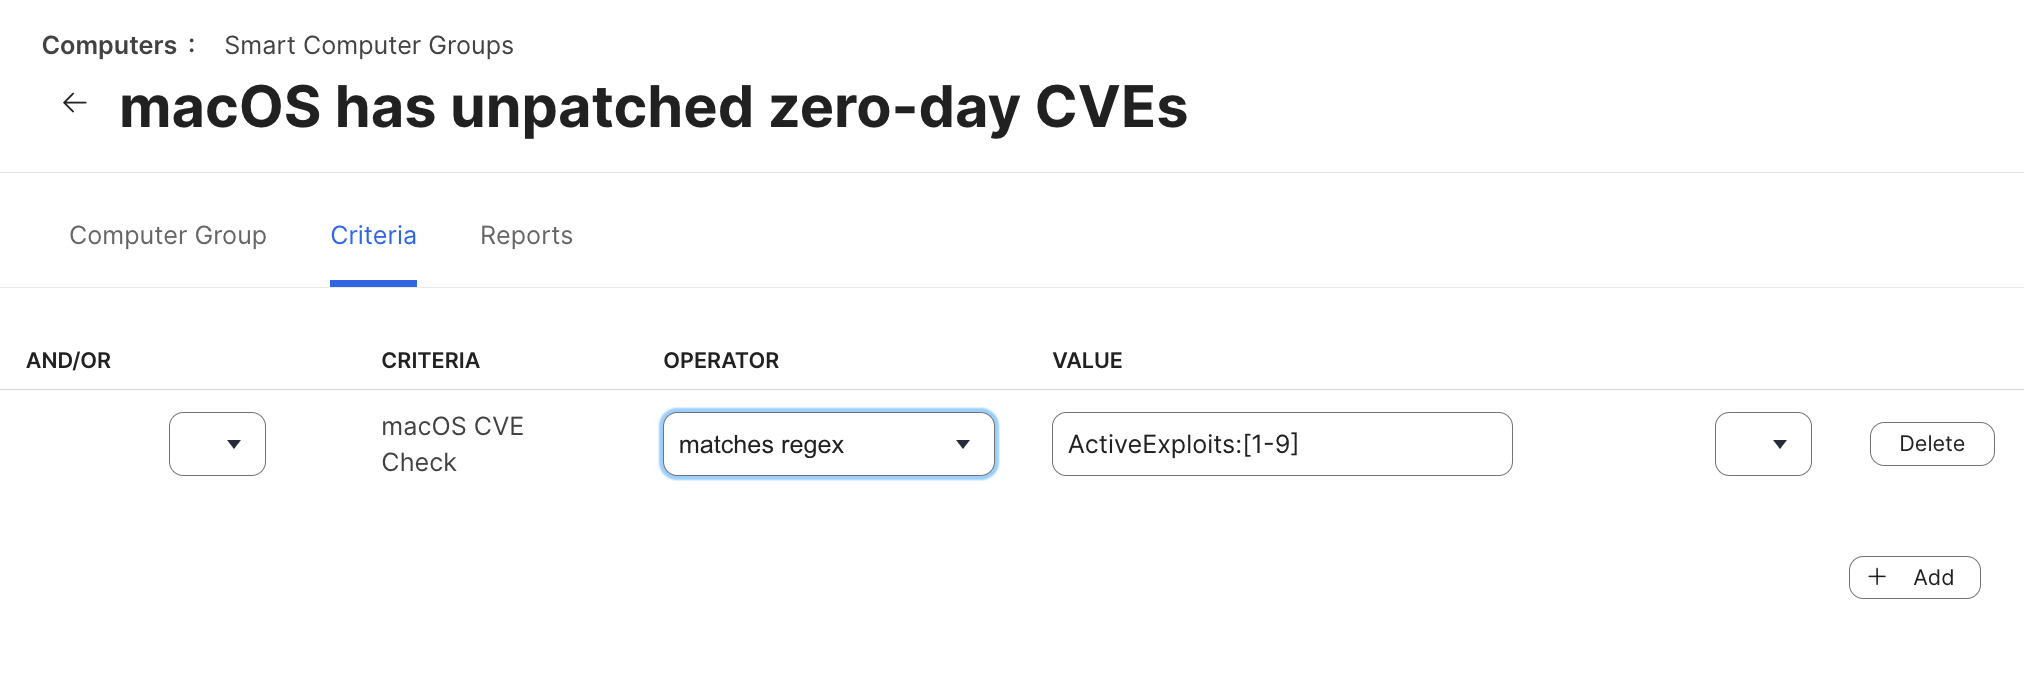 macOS has unpatched zero-day CVEs